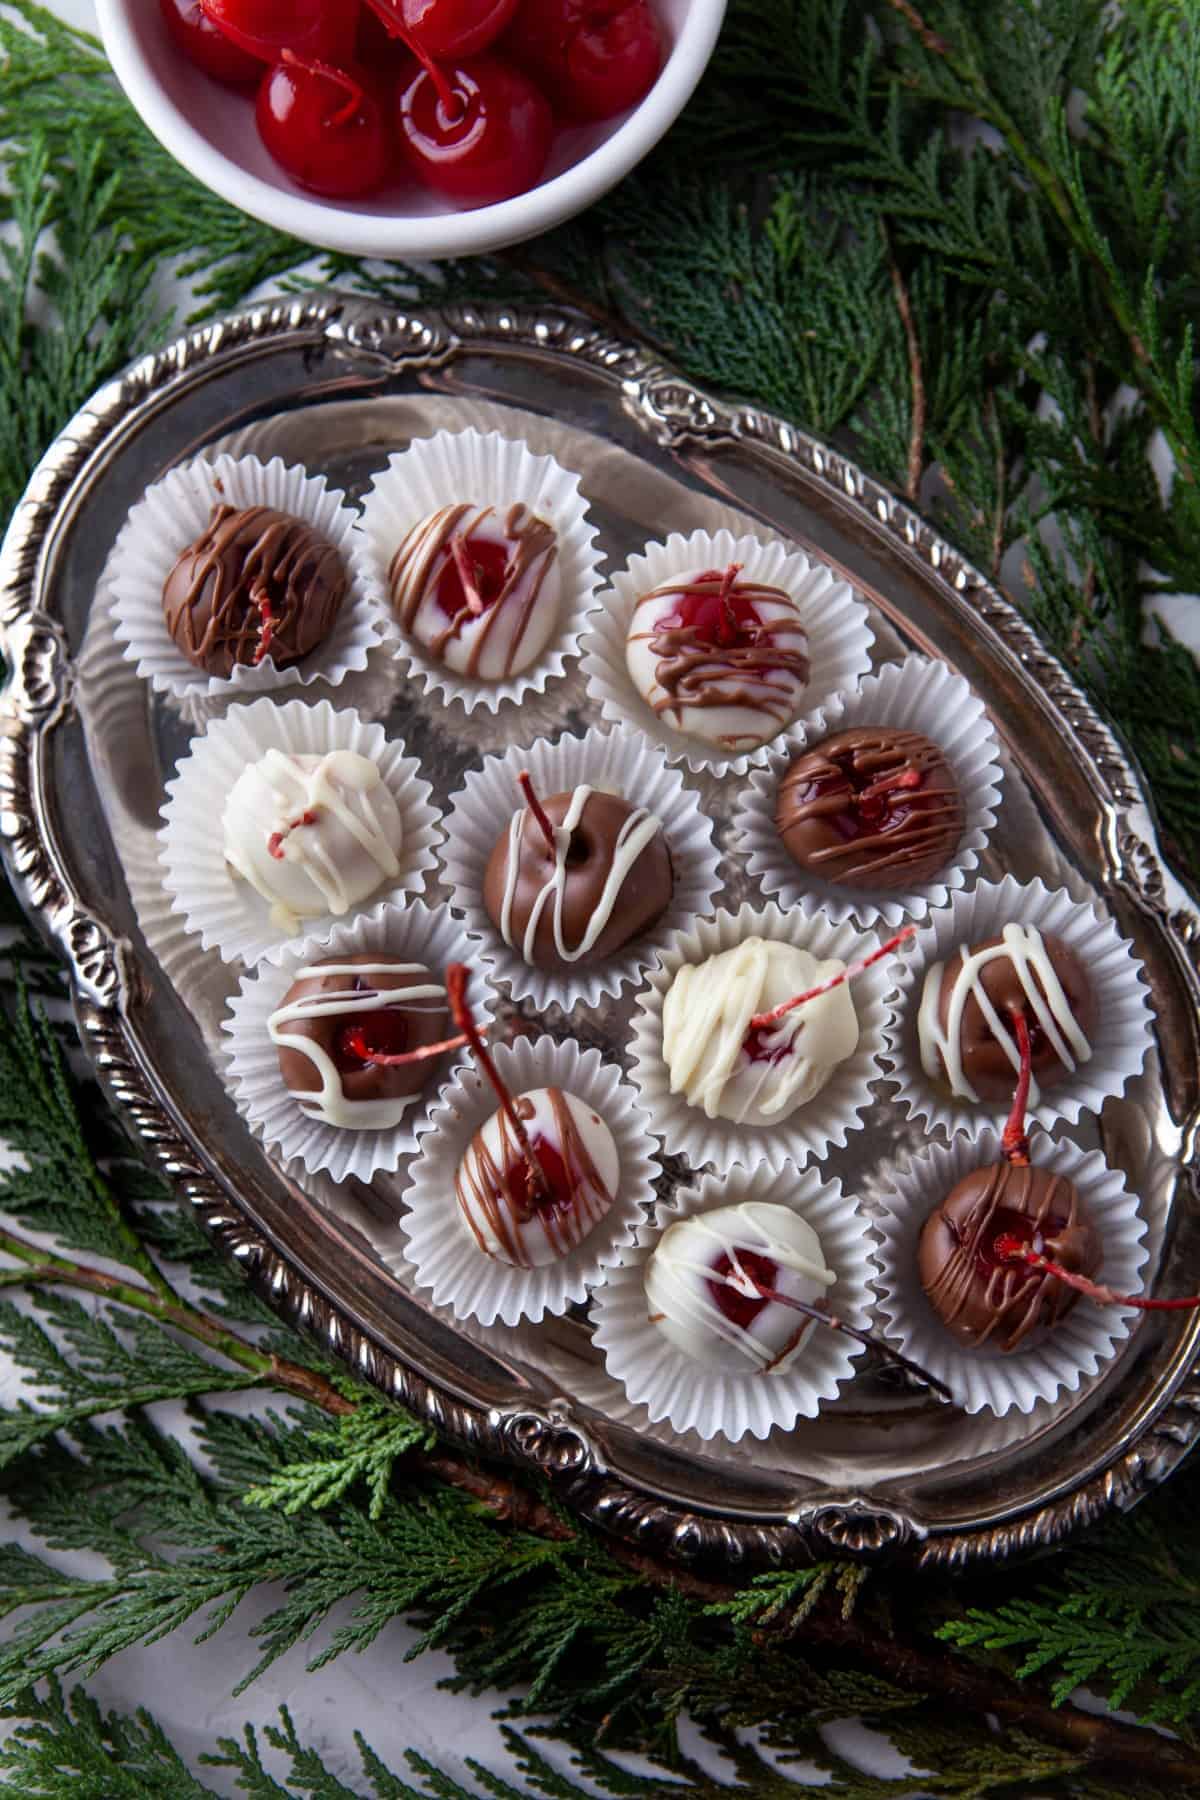 Grand Marnier Chocolate Cherries served in mini cupcake liners on a silver platter.